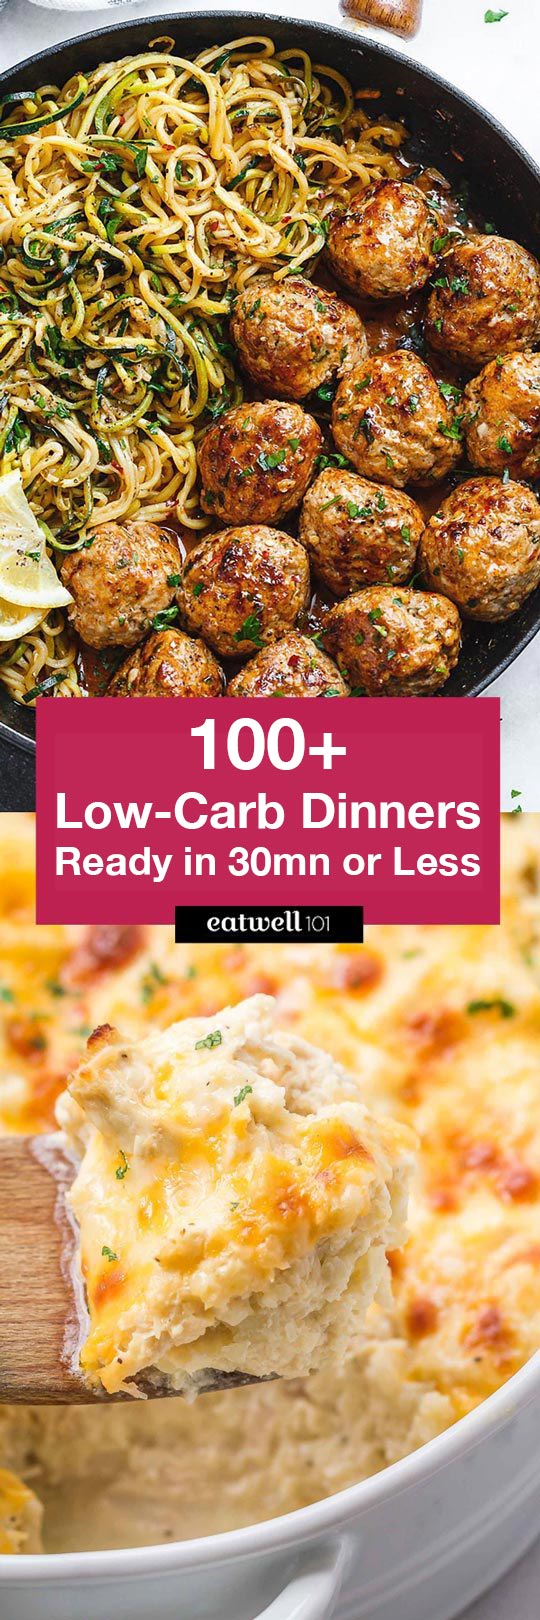 Quick Low Carb Recipes Ready in 30 Minutes or Less - #lowcarb #recipes #eatwell101 - If you’re trying to cut carbs while feeding a family, these quick low carb recipes are the answer!